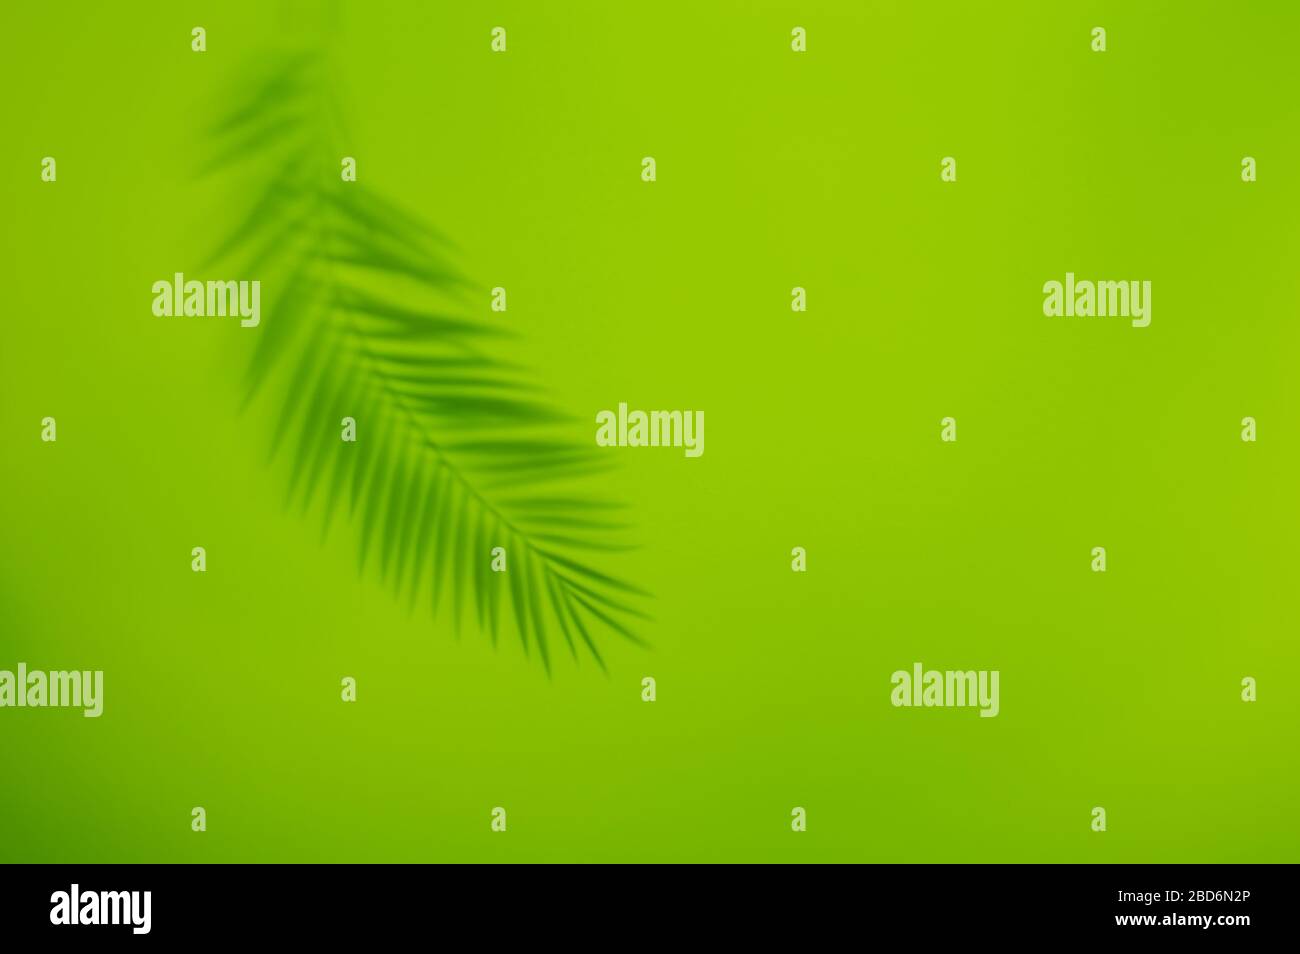 Palm leaf shadow on vivid green background. Minimal summer concept with tropical shadows. Creative abstract background with copy space for text. Stock Photo